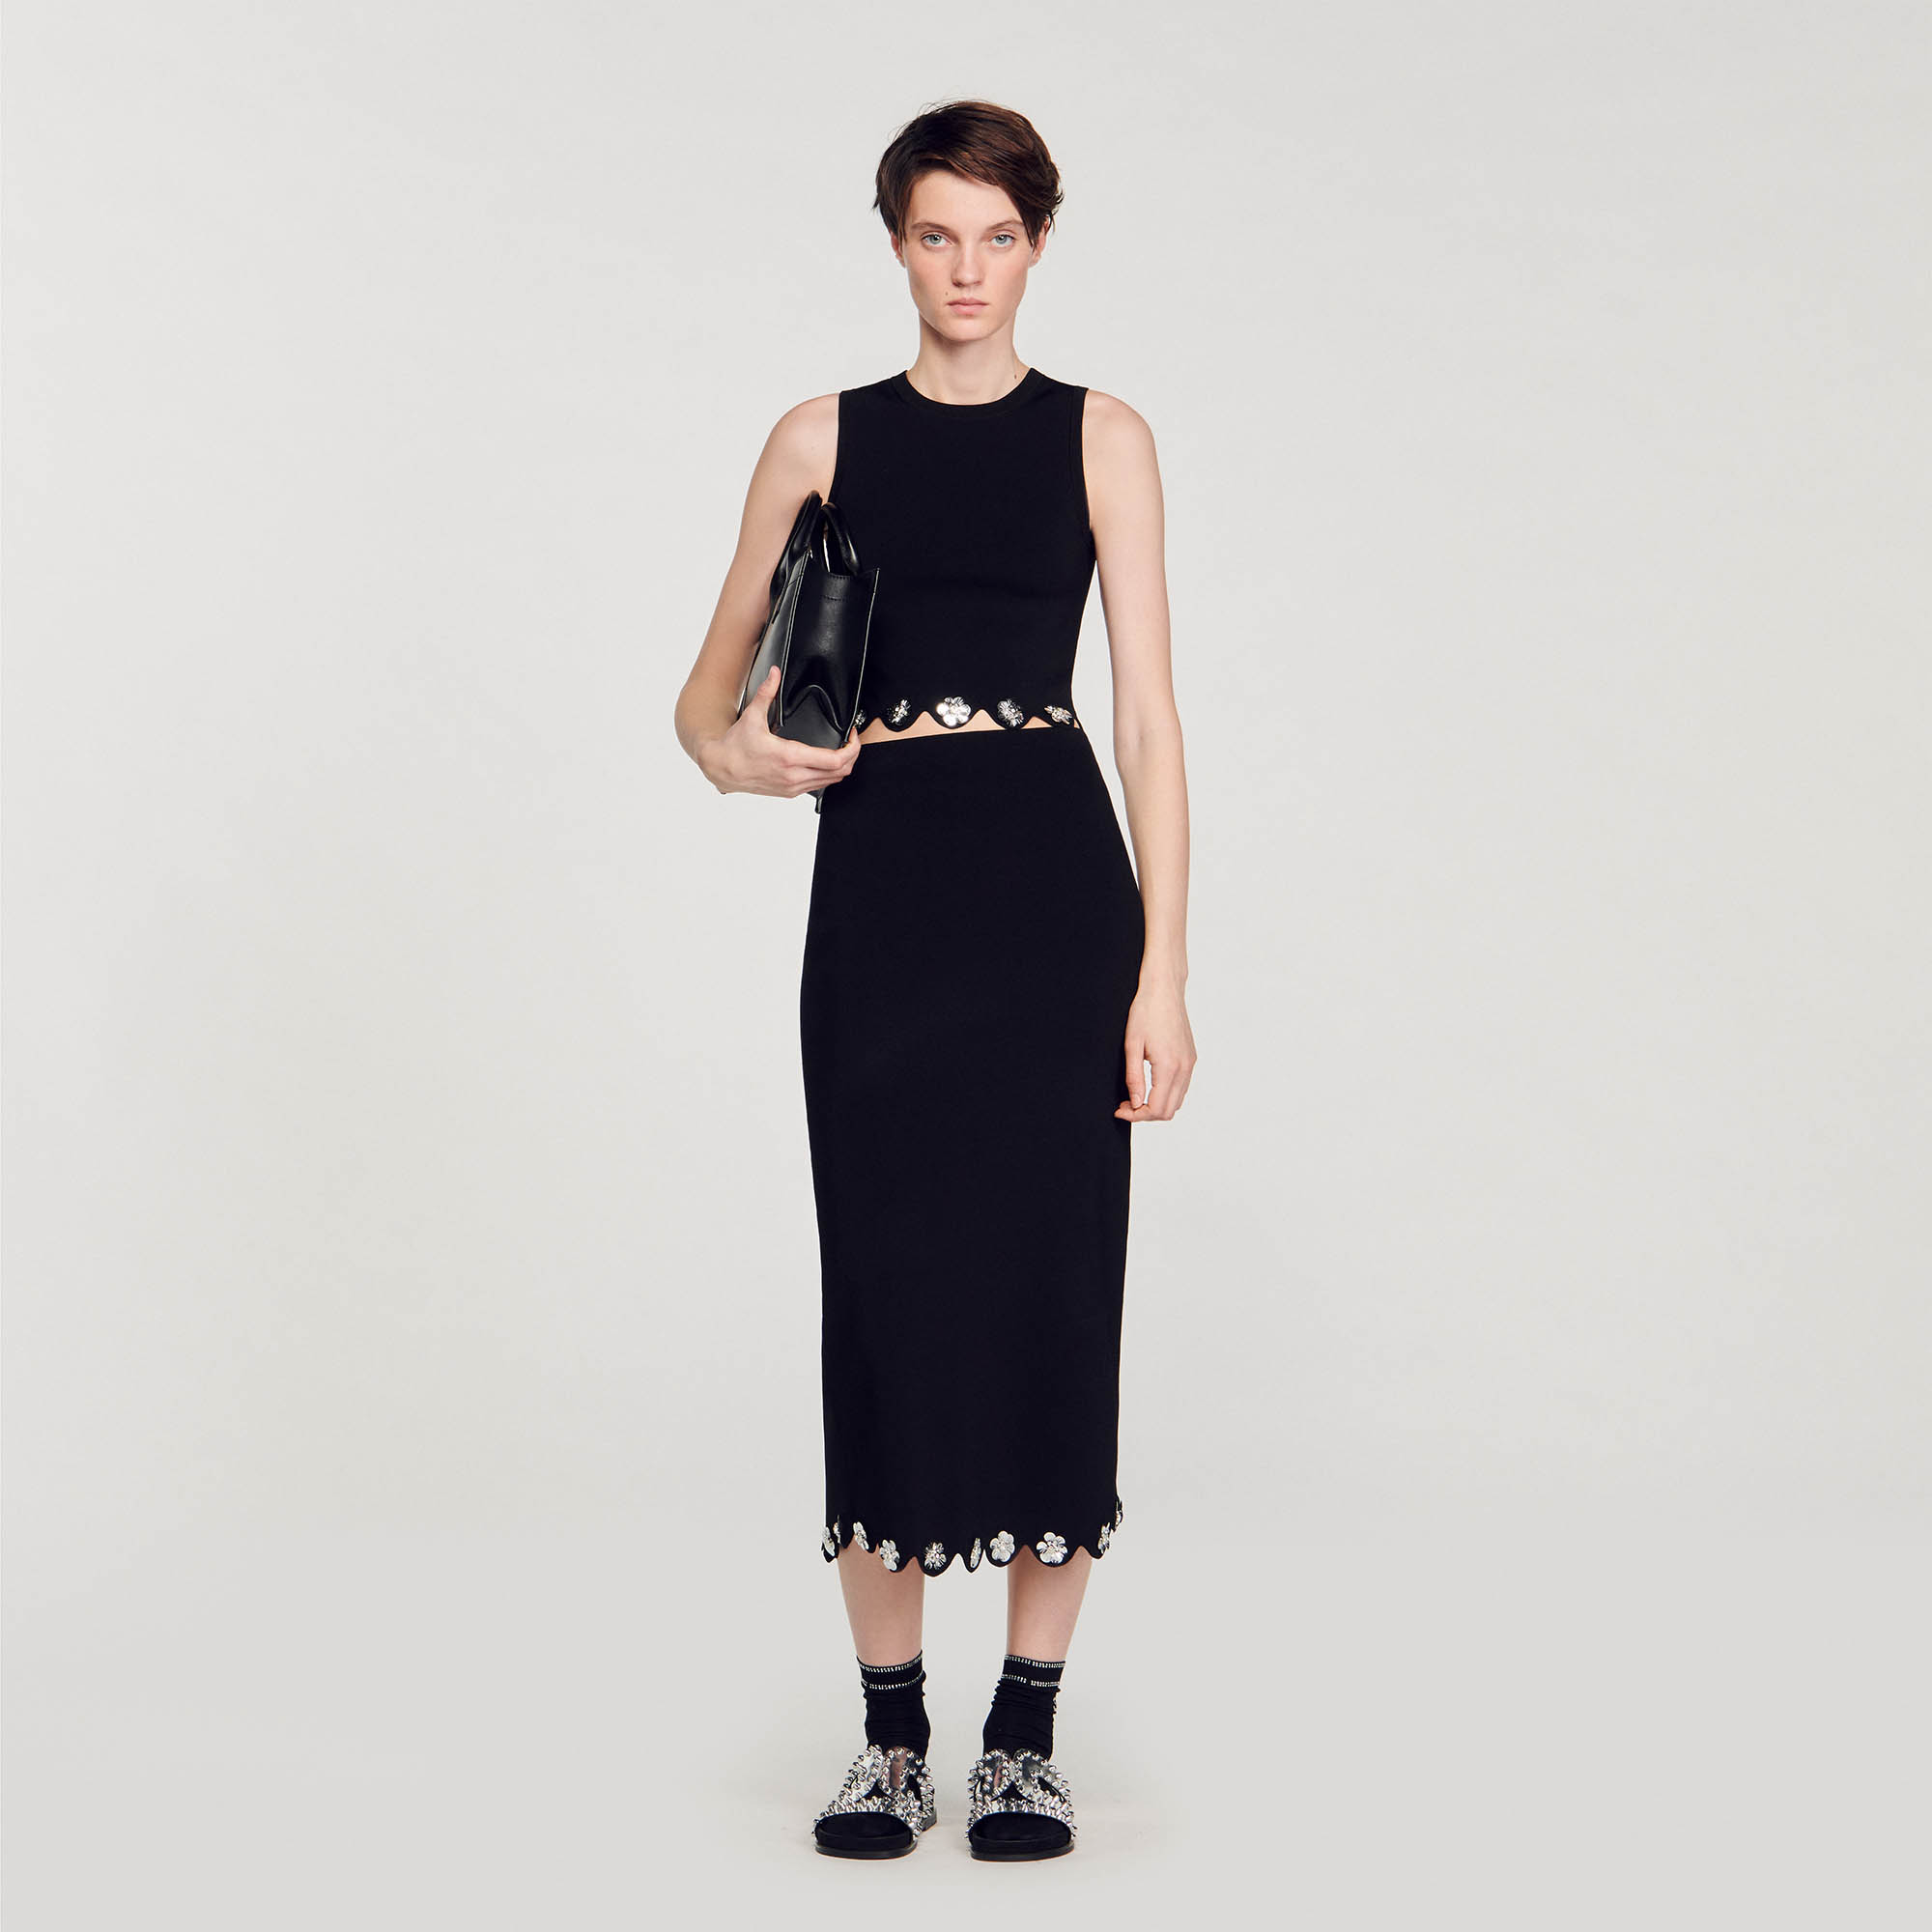 Sandro viscose Long knit skirt with a high waist, and a scalloped hemline embellished with sequinned flowers at the bottom